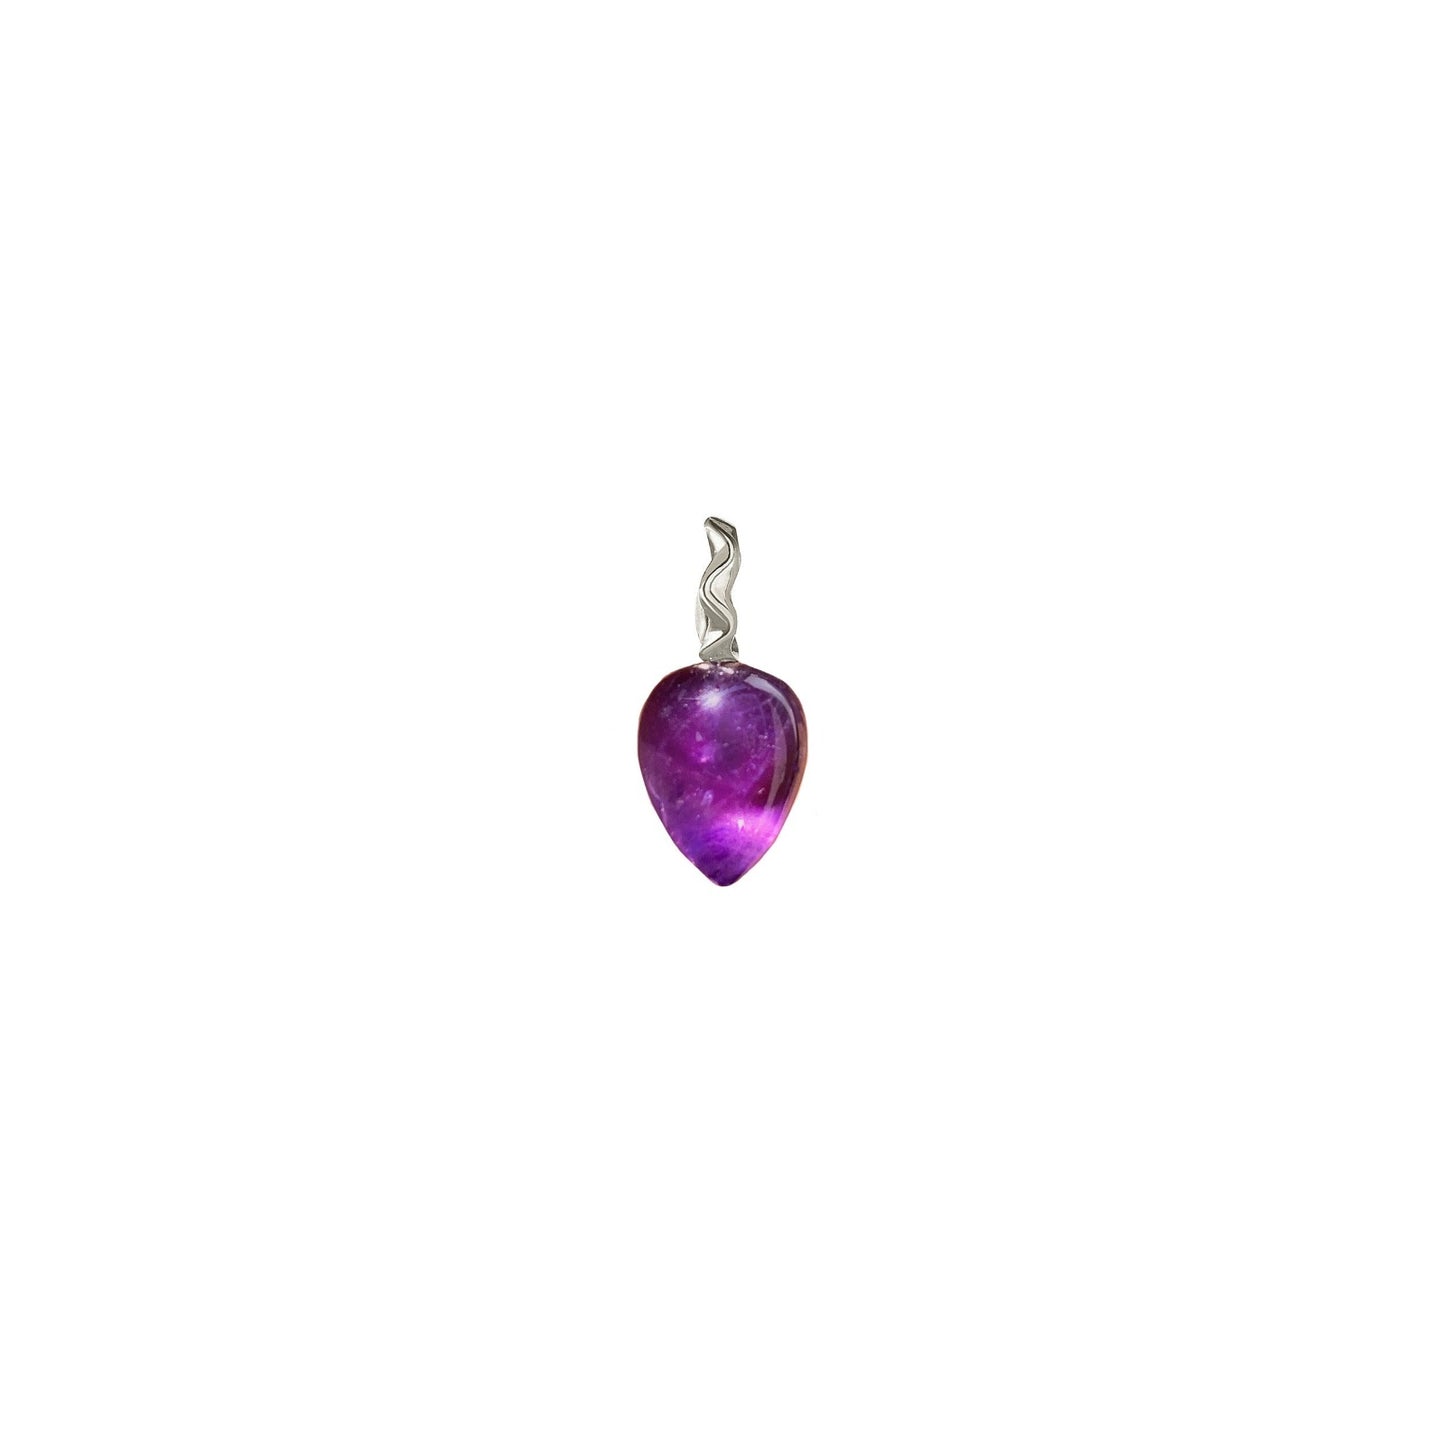 Amethyst acorn drop charm with 14k white gold bail